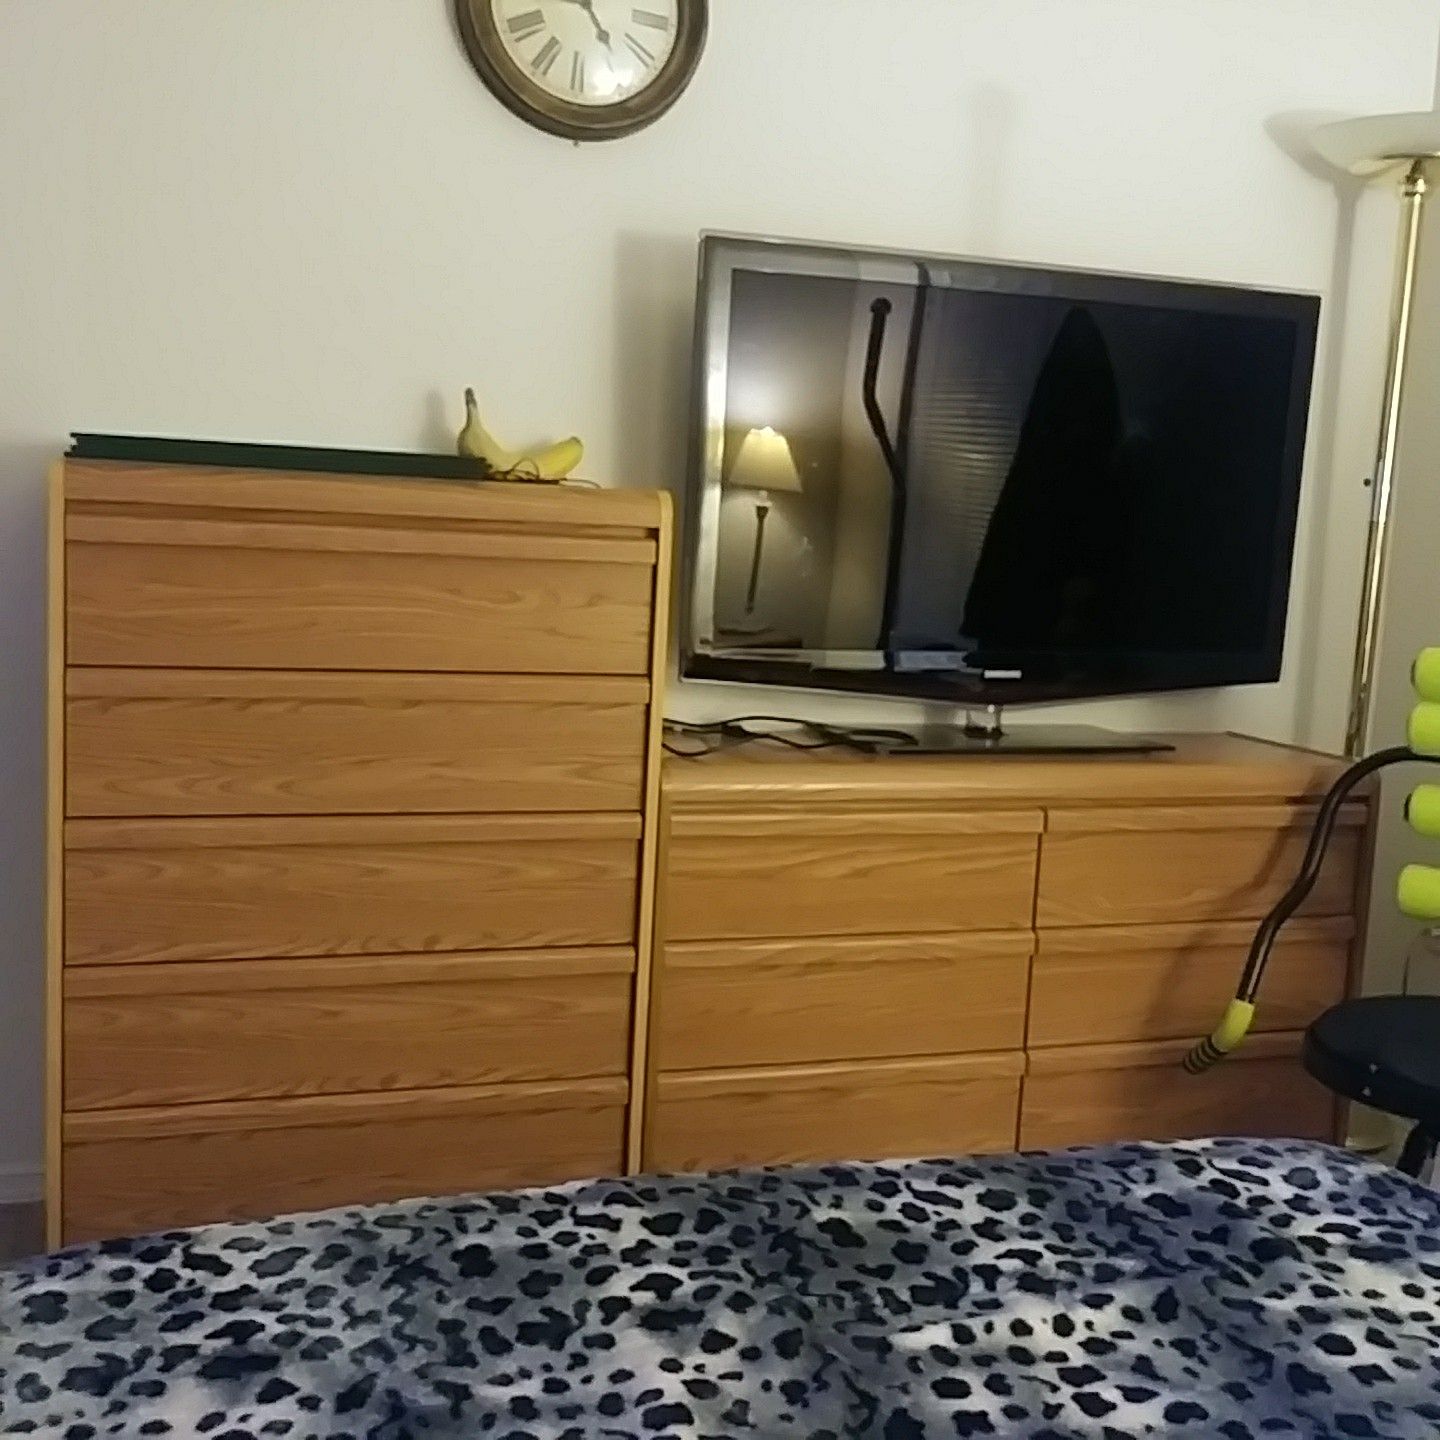 2 dressers one with a mirror and 2 matching night stands